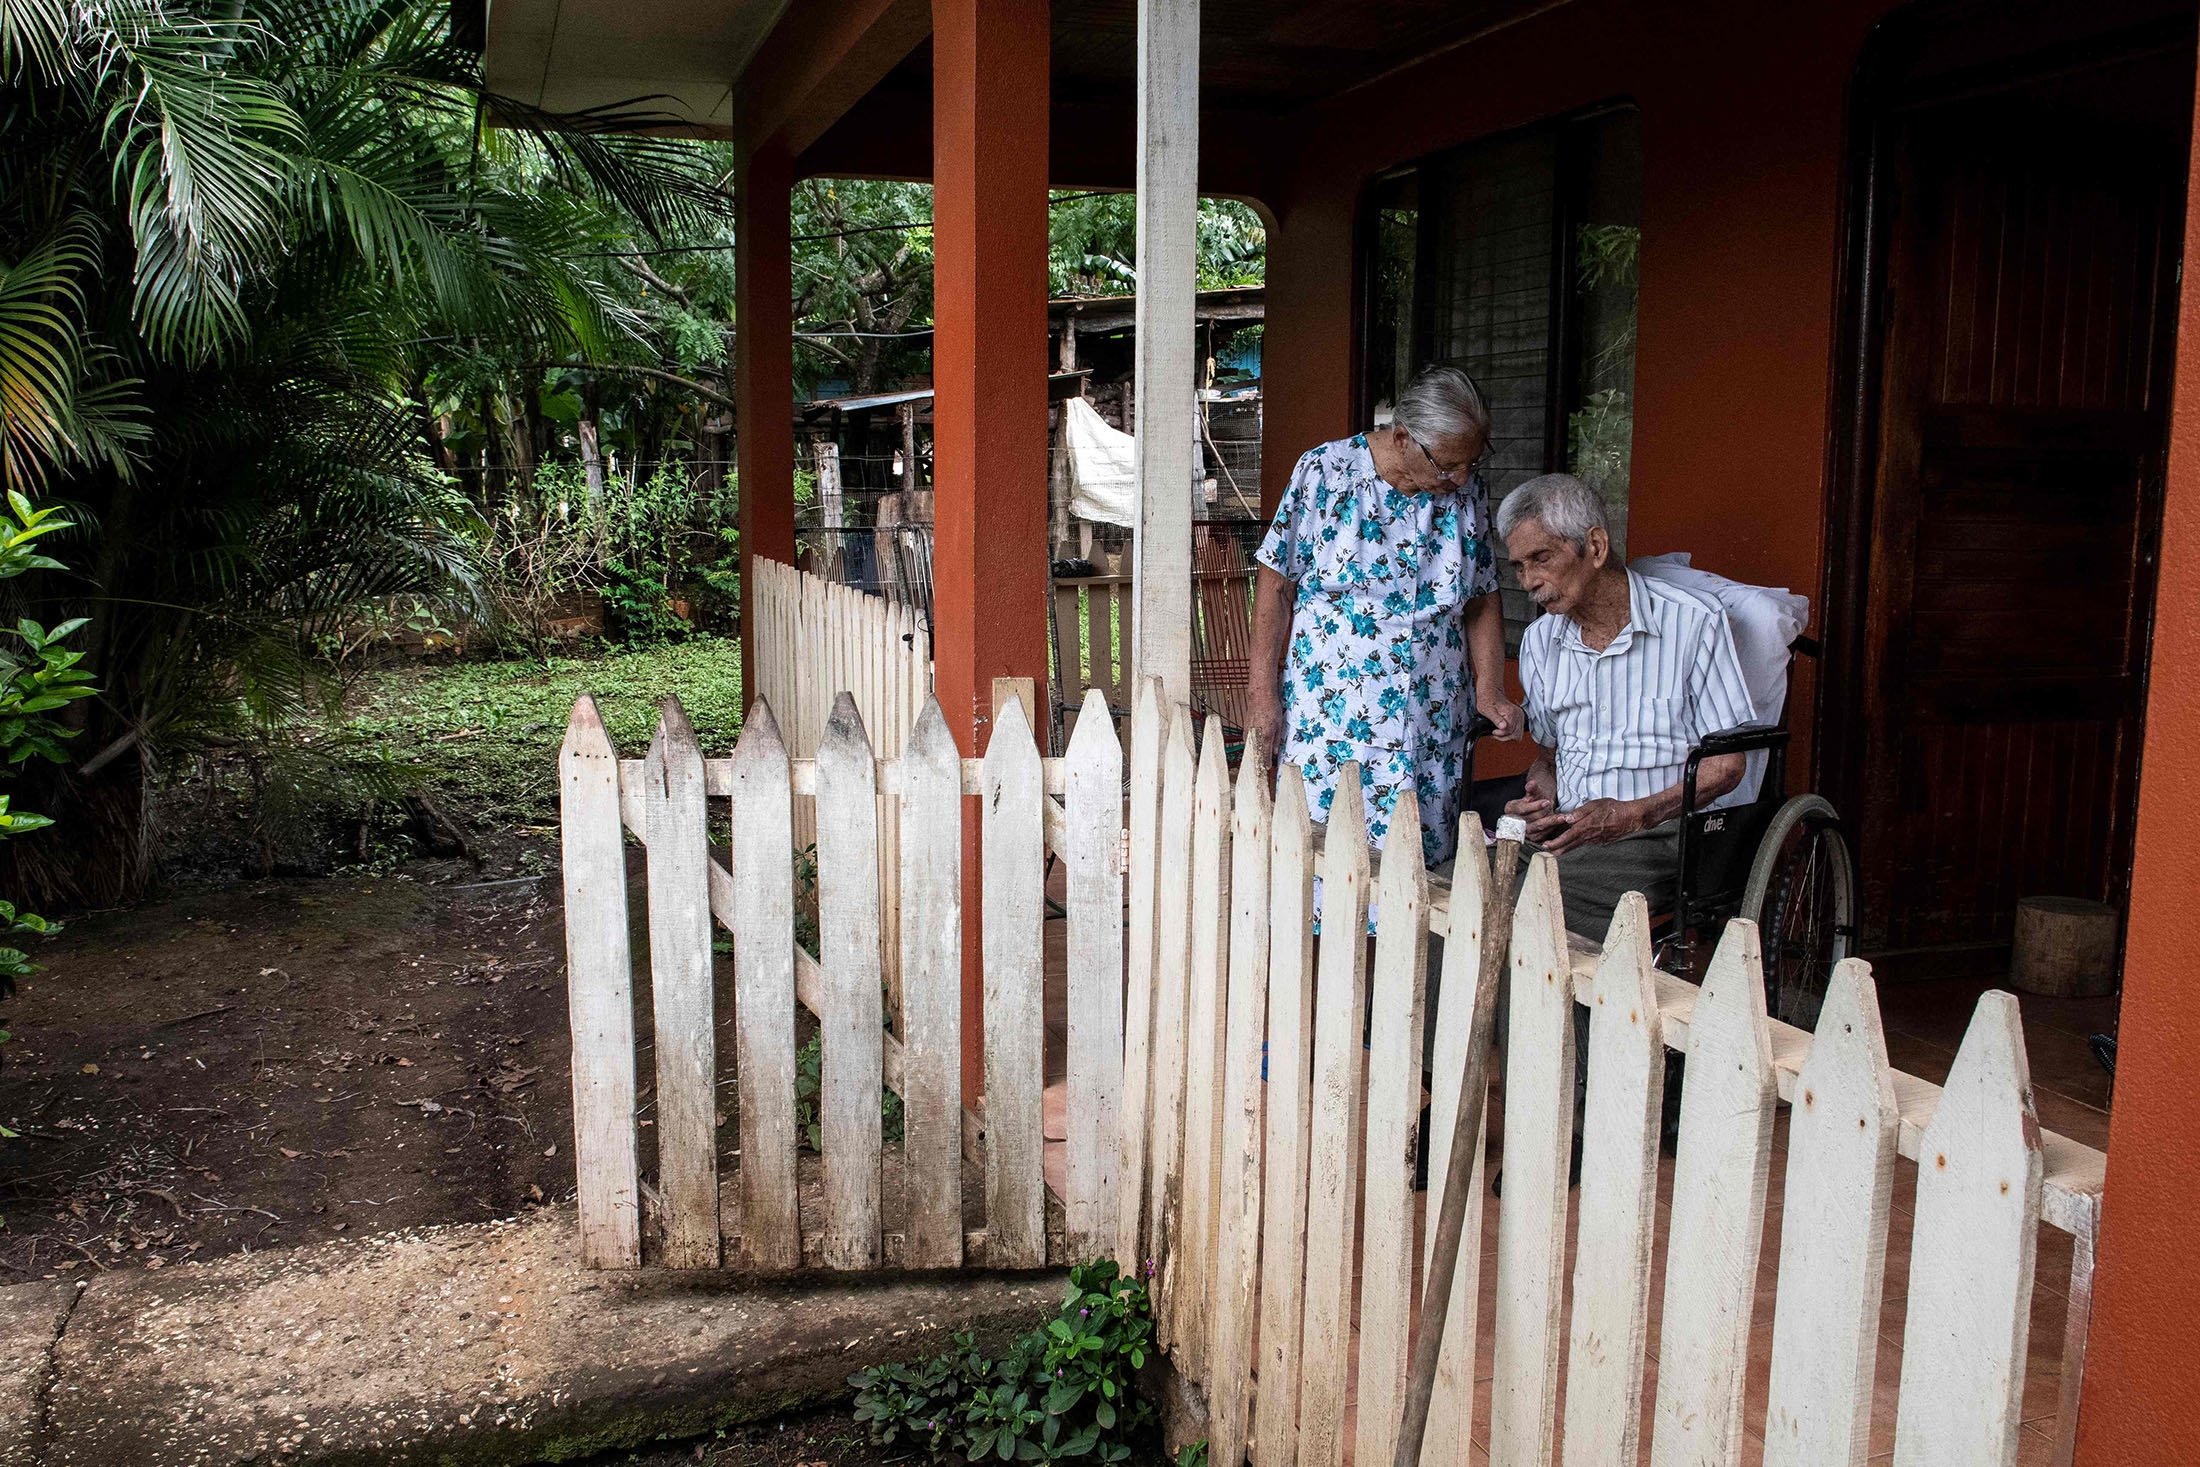 Clementina Espinoza (L), 92, and her husband Agustin Espinoza, 100, are seen outside their home in Nicoya, Costa Rica, Aug. 27, 2021. (AFP Photo)